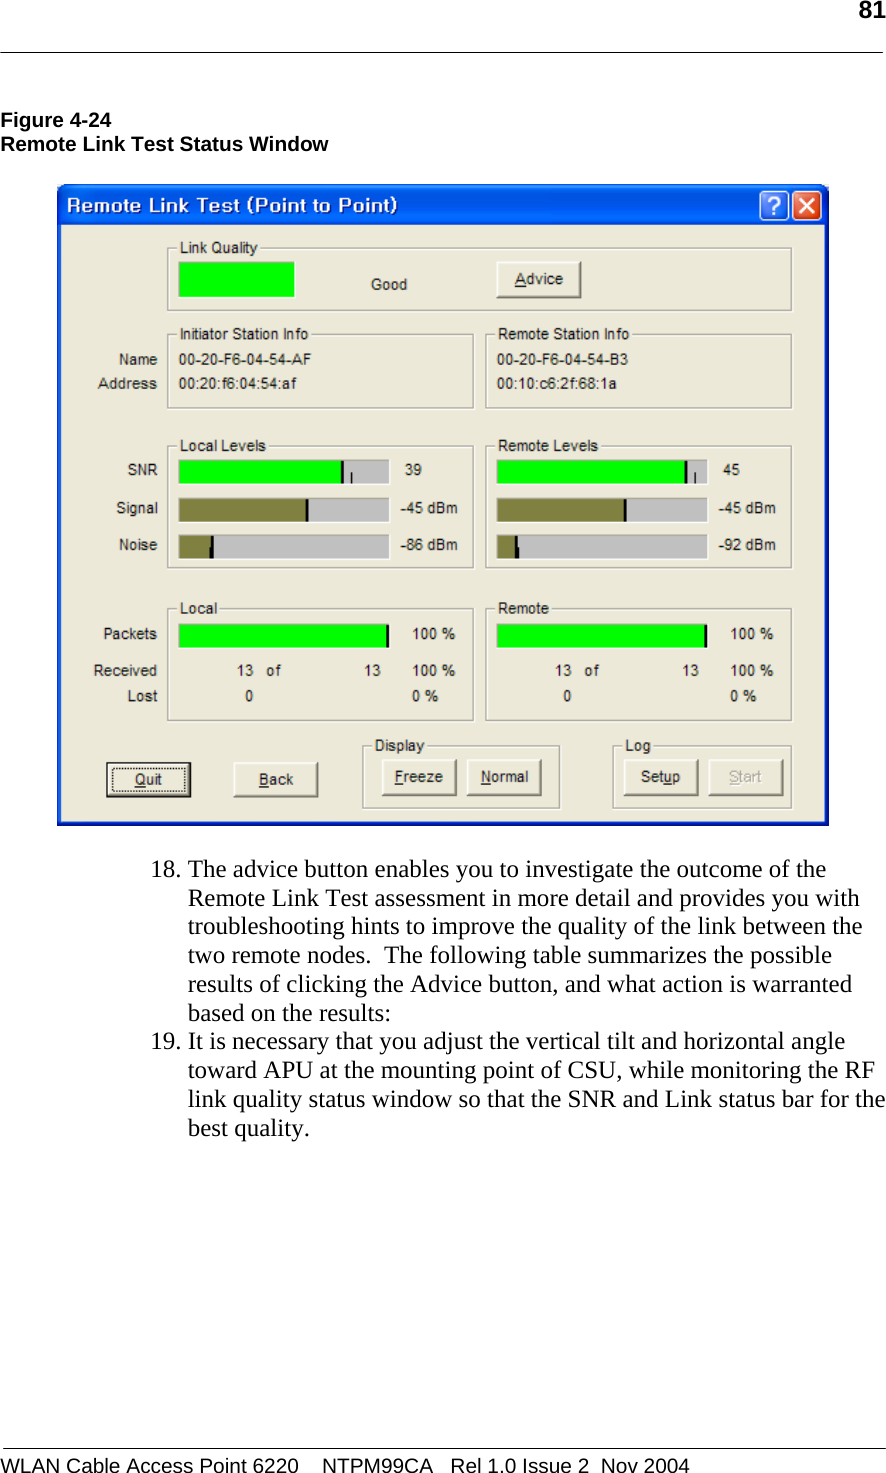   81  WLAN Cable Access Point 6220    NTPM99CA   Rel 1.0 Issue 2  Nov 2004 Figure 4-24 Remote Link Test Status Window    18. The advice button enables you to investigate the outcome of the Remote Link Test assessment in more detail and provides you with troubleshooting hints to improve the quality of the link between the two remote nodes.  The following table summarizes the possible results of clicking the Advice button, and what action is warranted based on the results: 19. It is necessary that you adjust the vertical tilt and horizontal angle toward APU at the mounting point of CSU, while monitoring the RF link quality status window so that the SNR and Link status bar for the best quality.  